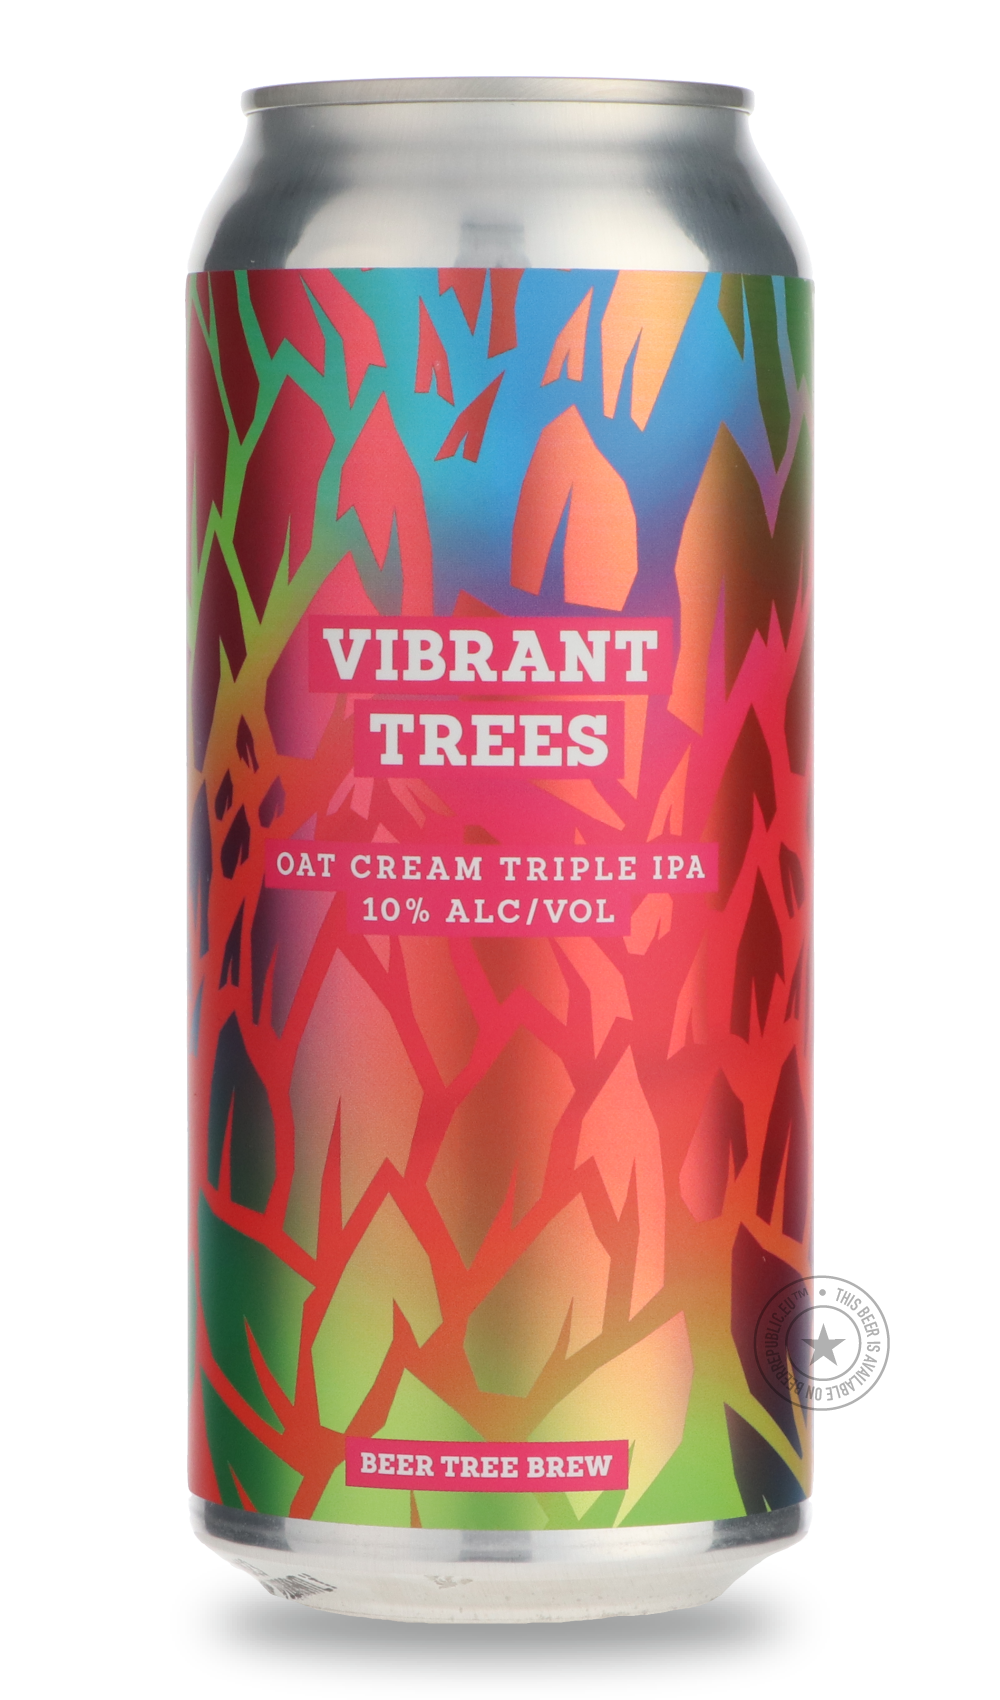 -Beer Tree- Vibrant Trees-IPA- Only @ Beer Republic - The best online beer store for American & Canadian craft beer - Buy beer online from the USA and Canada - Bier online kopen - Amerikaans bier kopen - Craft beer store - Craft beer kopen - Amerikanisch bier kaufen - Bier online kaufen - Acheter biere online - IPA - Stout - Porter - New England IPA - Hazy IPA - Imperial Stout - Barrel Aged - Barrel Aged Imperial Stout - Brown - Dark beer - Blond - Blonde - Pilsner - Lager - Wheat - Weizen - Amber - Barley 